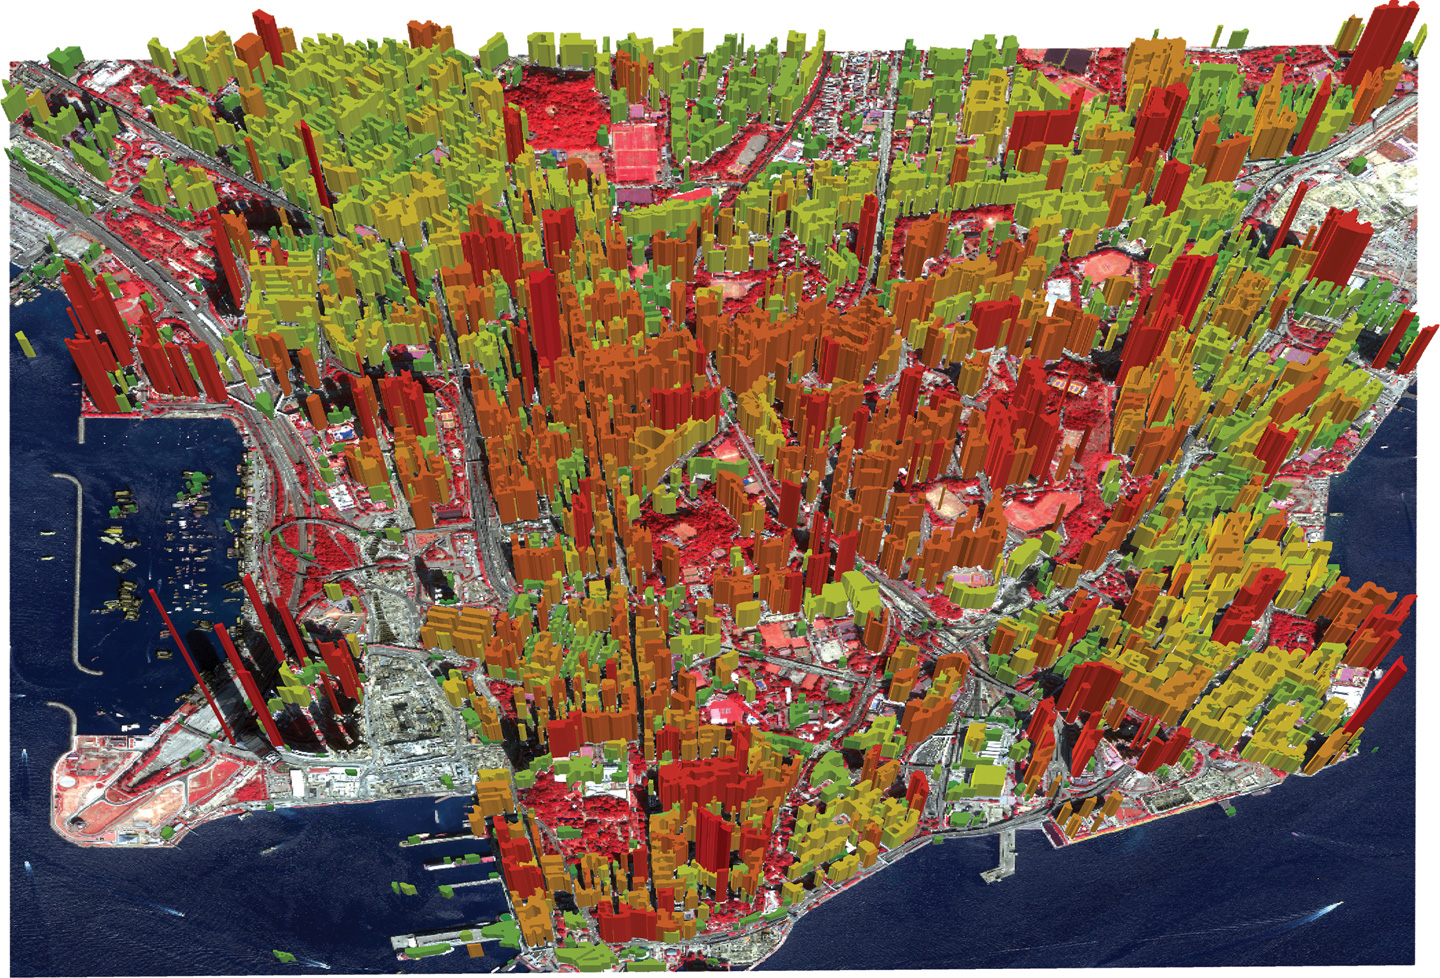 In the Kowloon 3D map produced by CUHK, the height of buildings is indicated by colours. The buildings in red are the tall ones